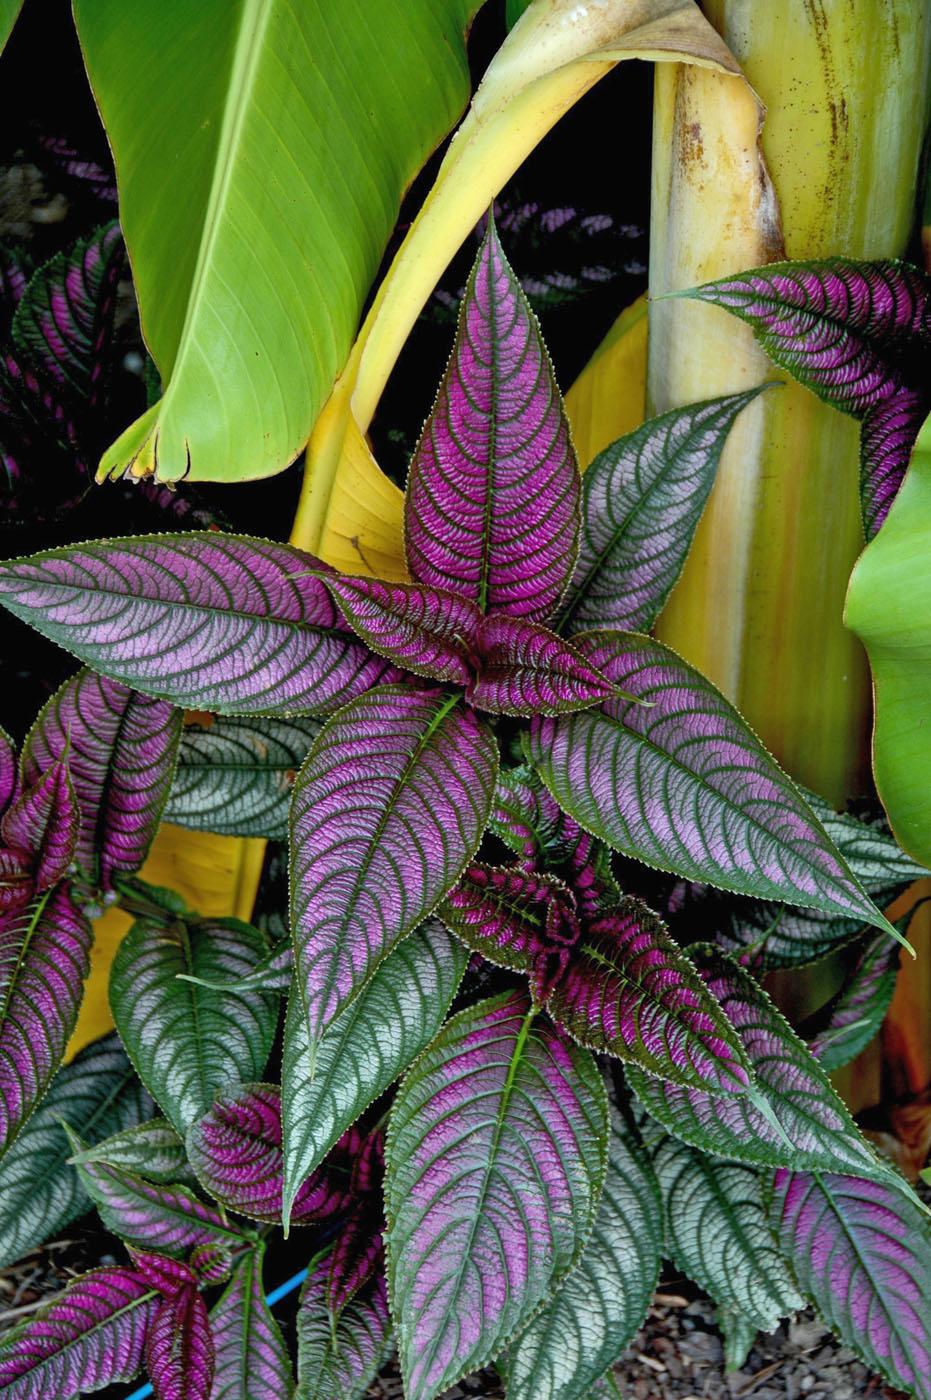 The widely varying Acanthus family of plants has many terrific varieties for the landscape. Here Persian Shield shows off its iridescent purple and silver foliage. (Photo by Norman Winter)